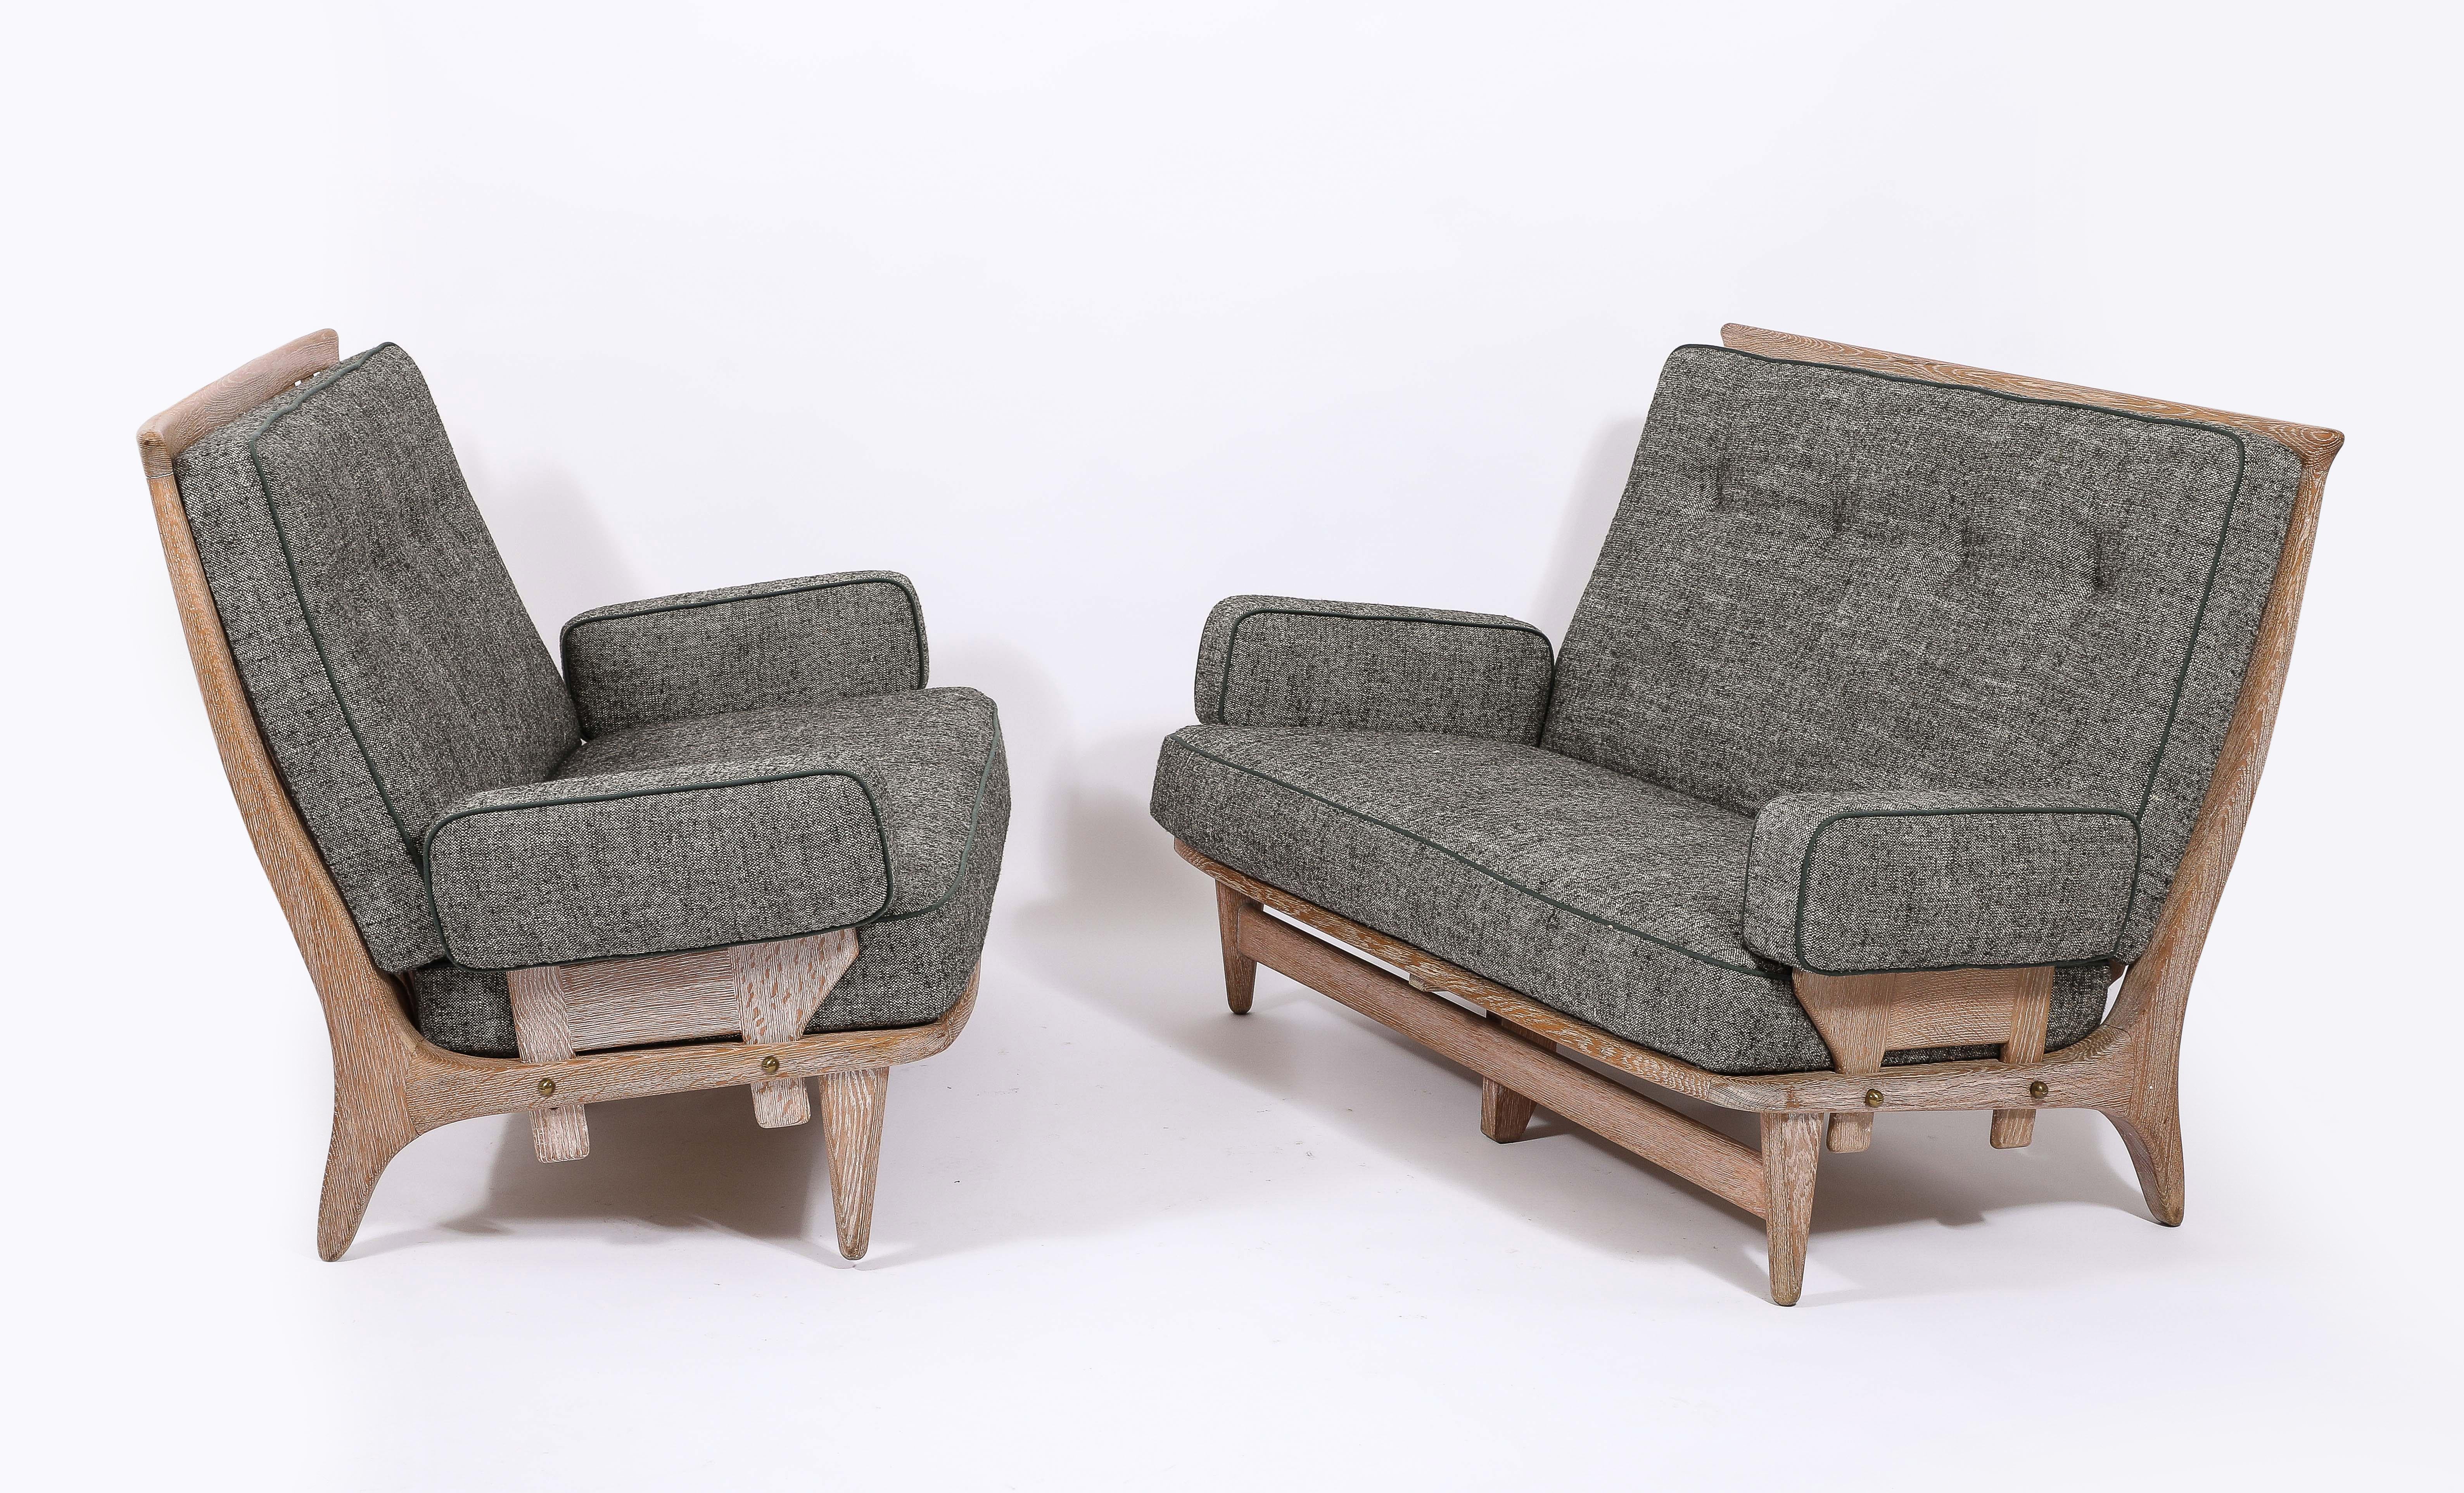 Guillerme & Chambron Settees in Oak, France 1960's For Sale 5